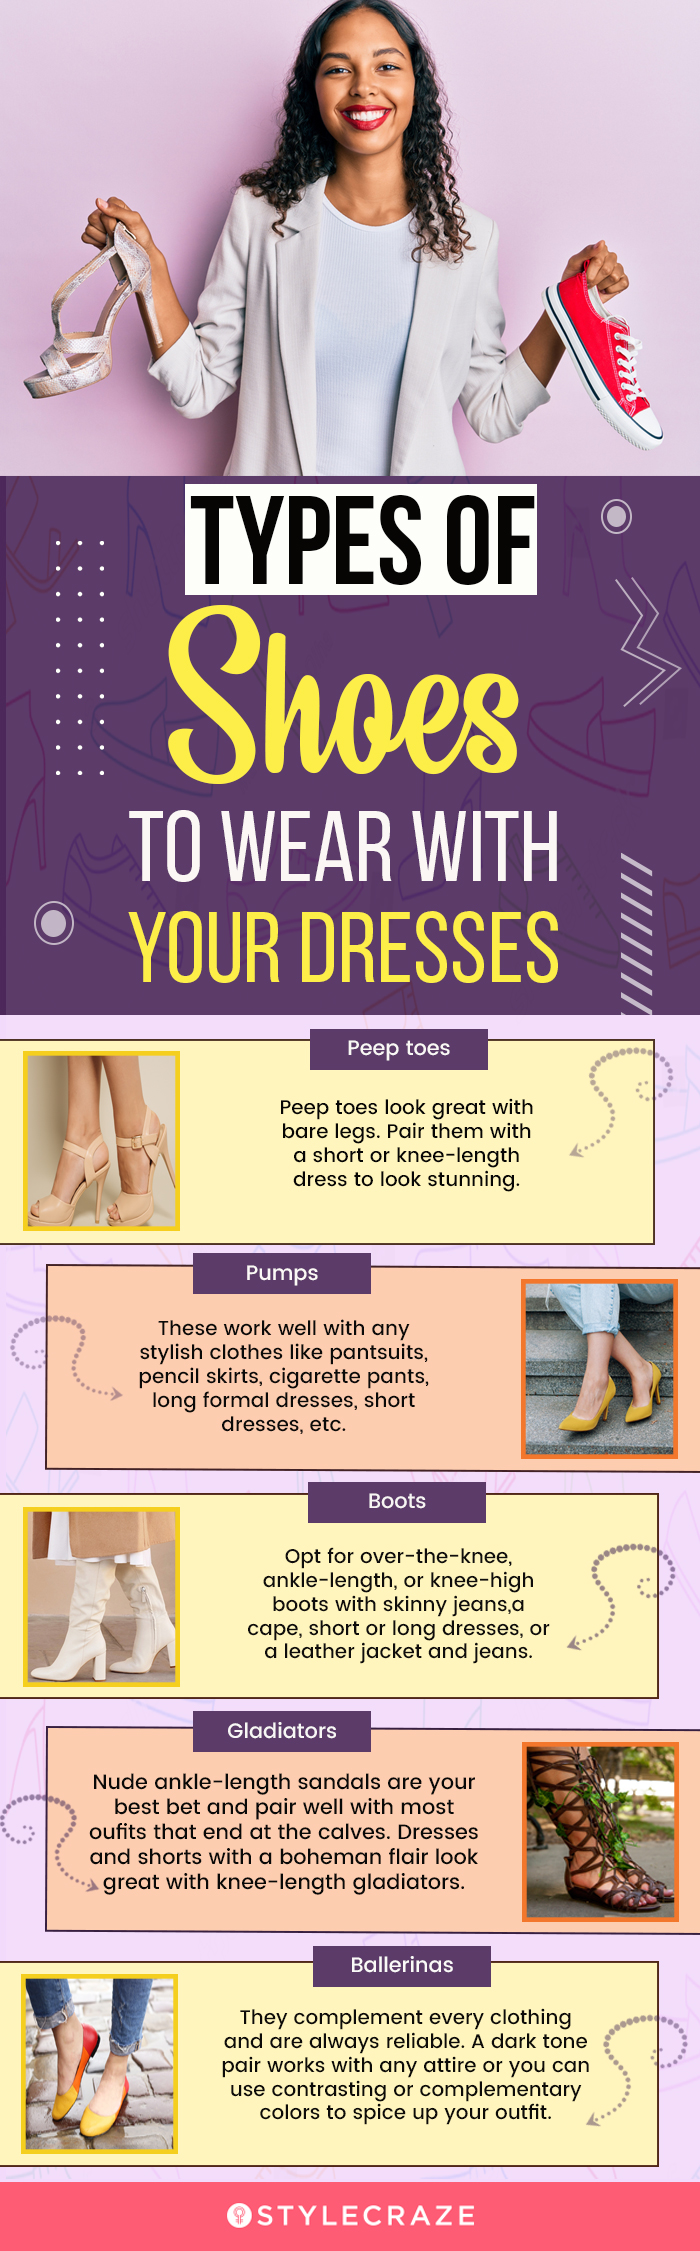 types of shoes to wear with your dresses [infographic]